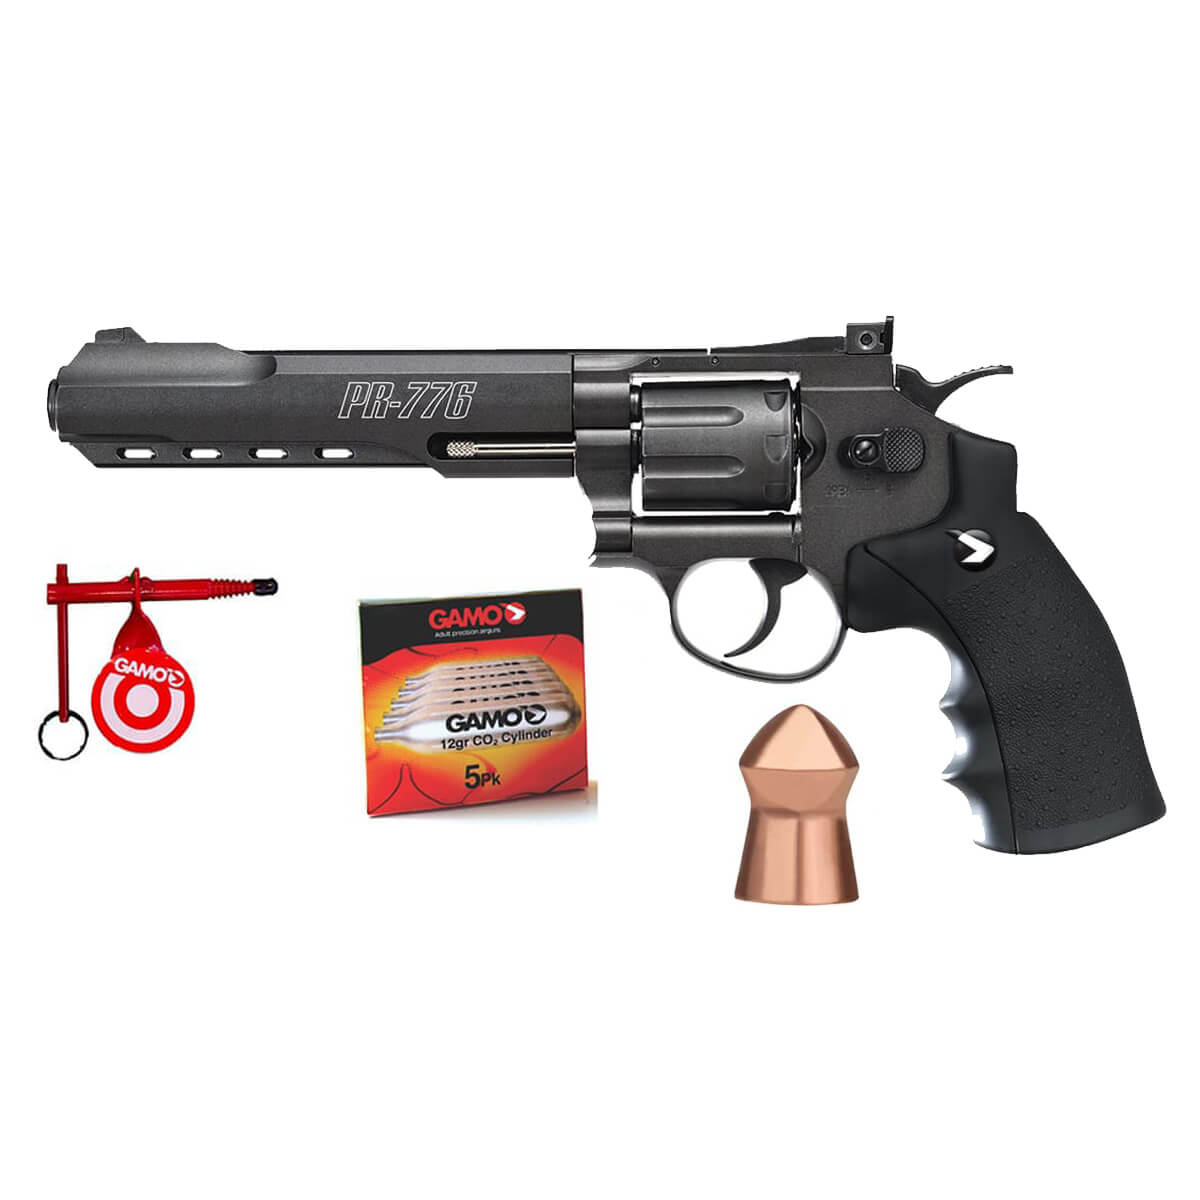 Gamo PR-776 CO2 .177 Caliber Revolver Kit with pellets, CO2 and target